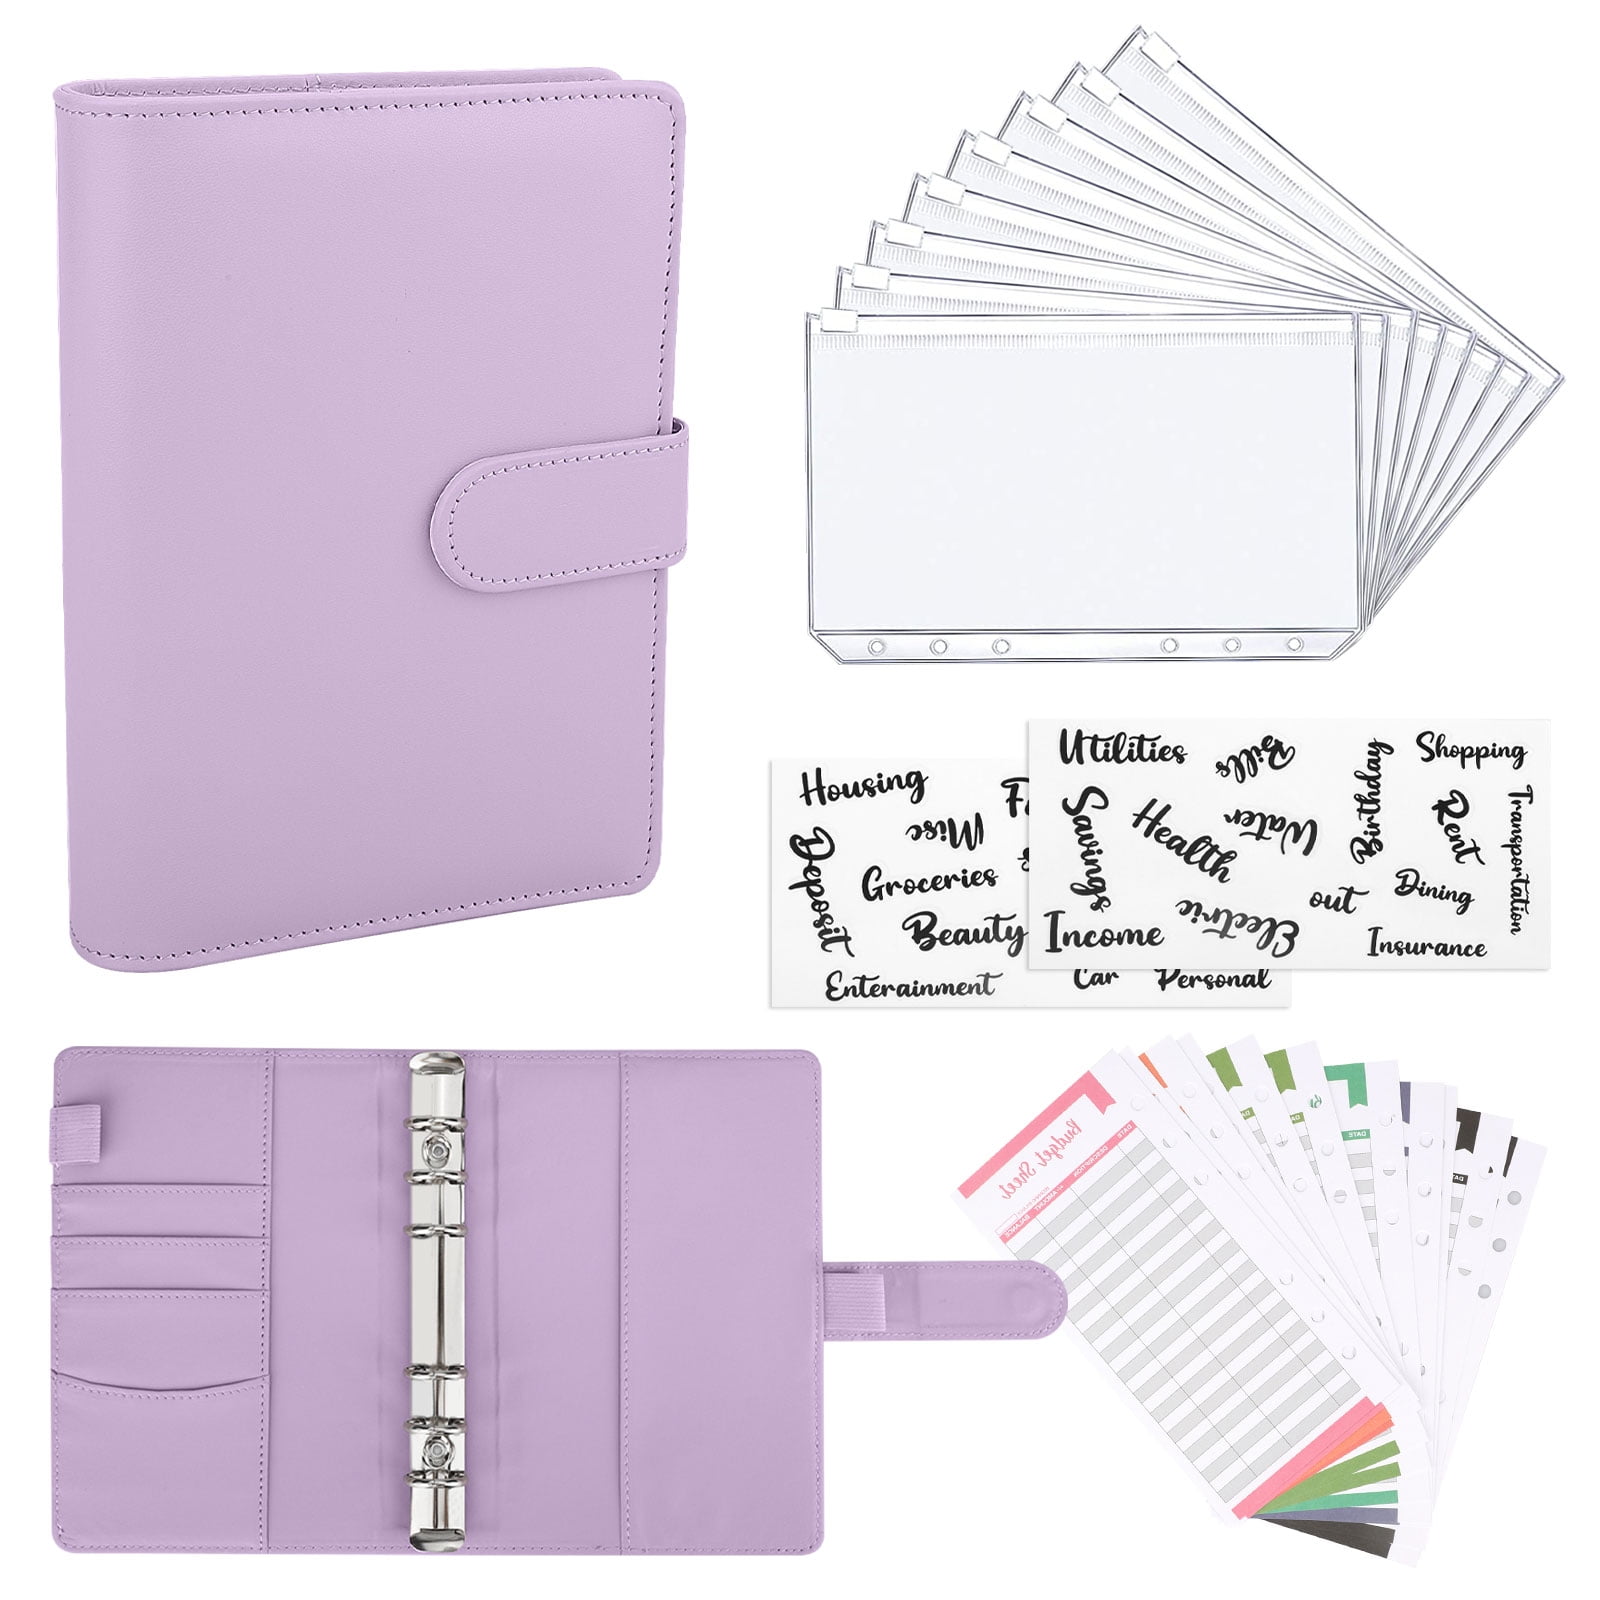 LINTRU Budget Binder with Zipper Envelopes, Money Organizer for Cash, Premium PU Leather A6 Binder with Expense Budget Sheets and Stickers, Savings